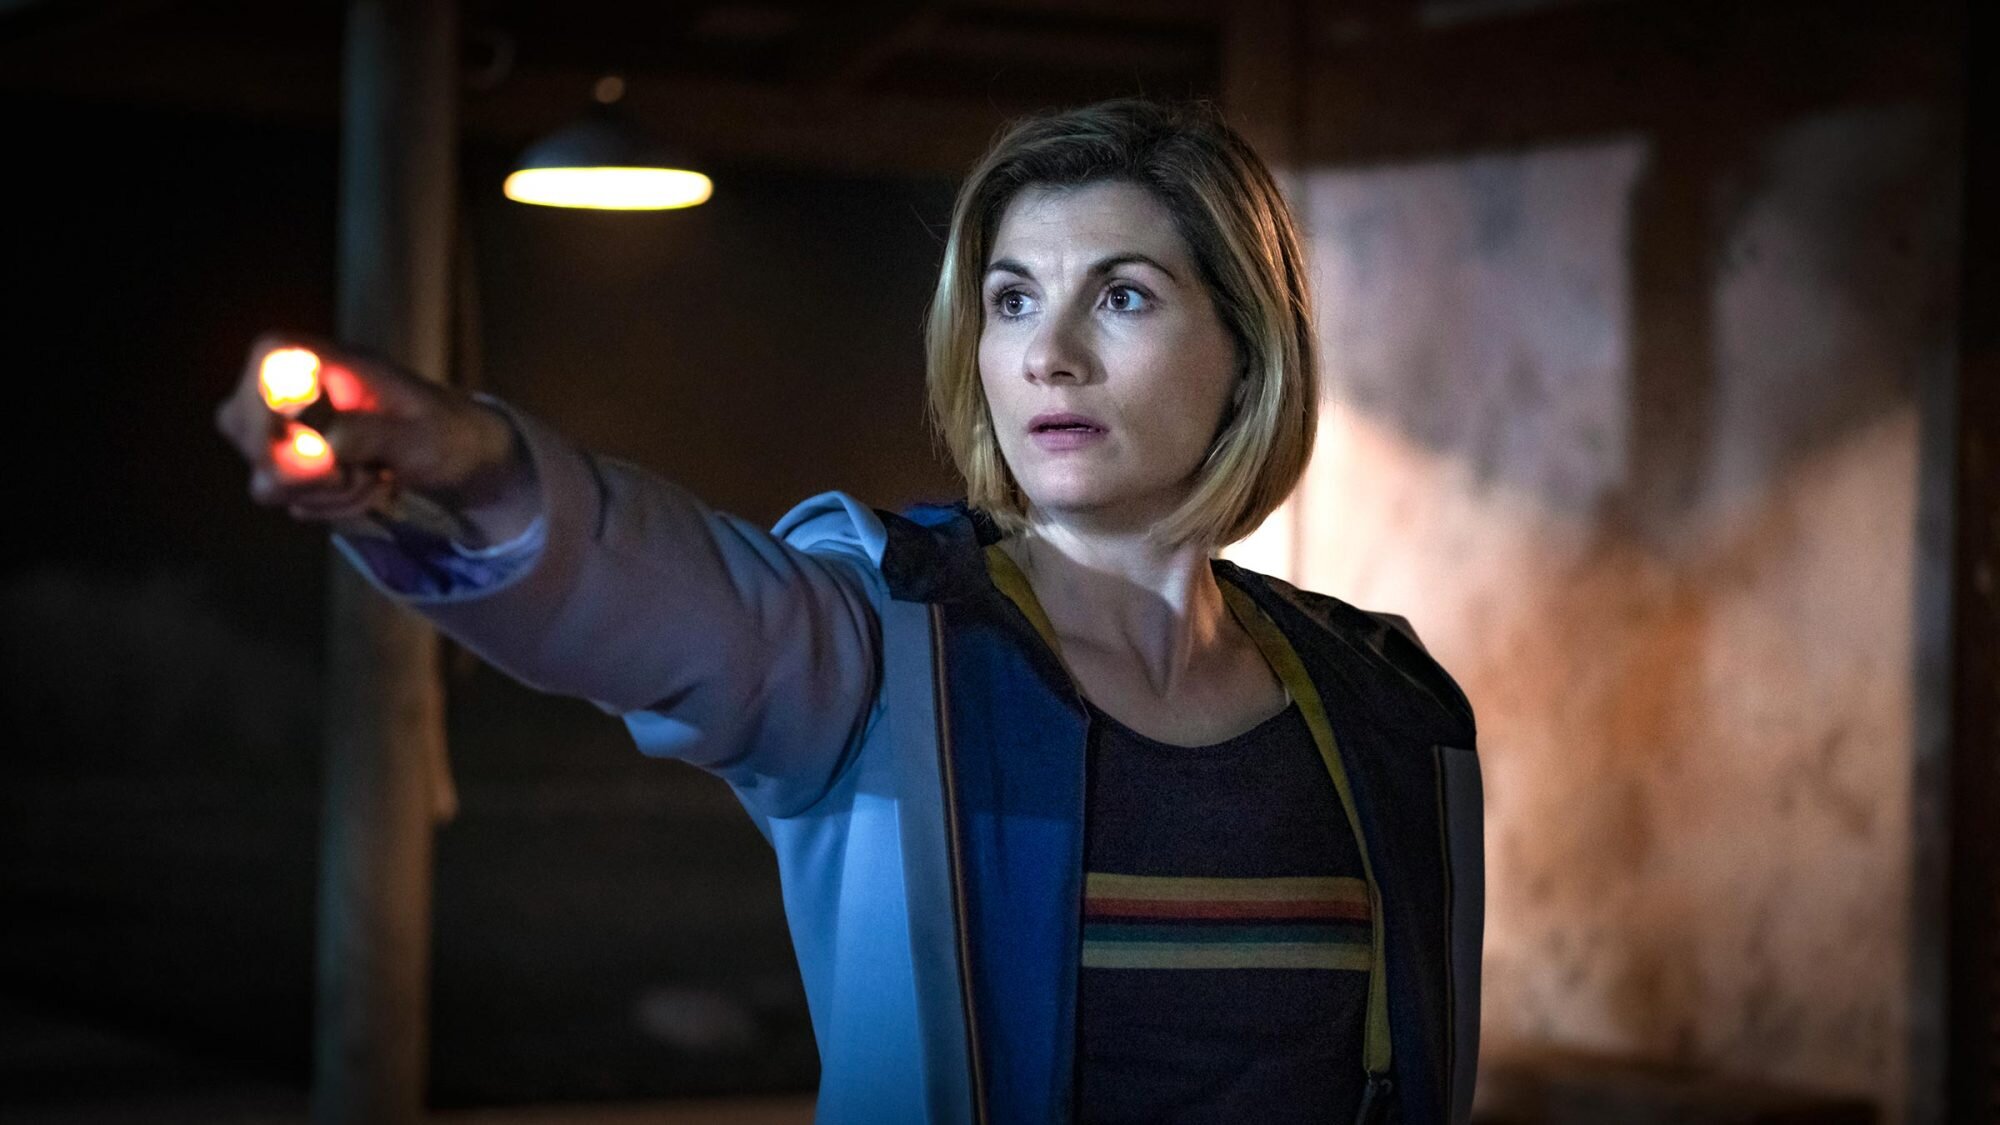 'Doctor Who' Triggers Man Who Thinks Women Can't Be Role Models, Cuz Fragile Masculinity